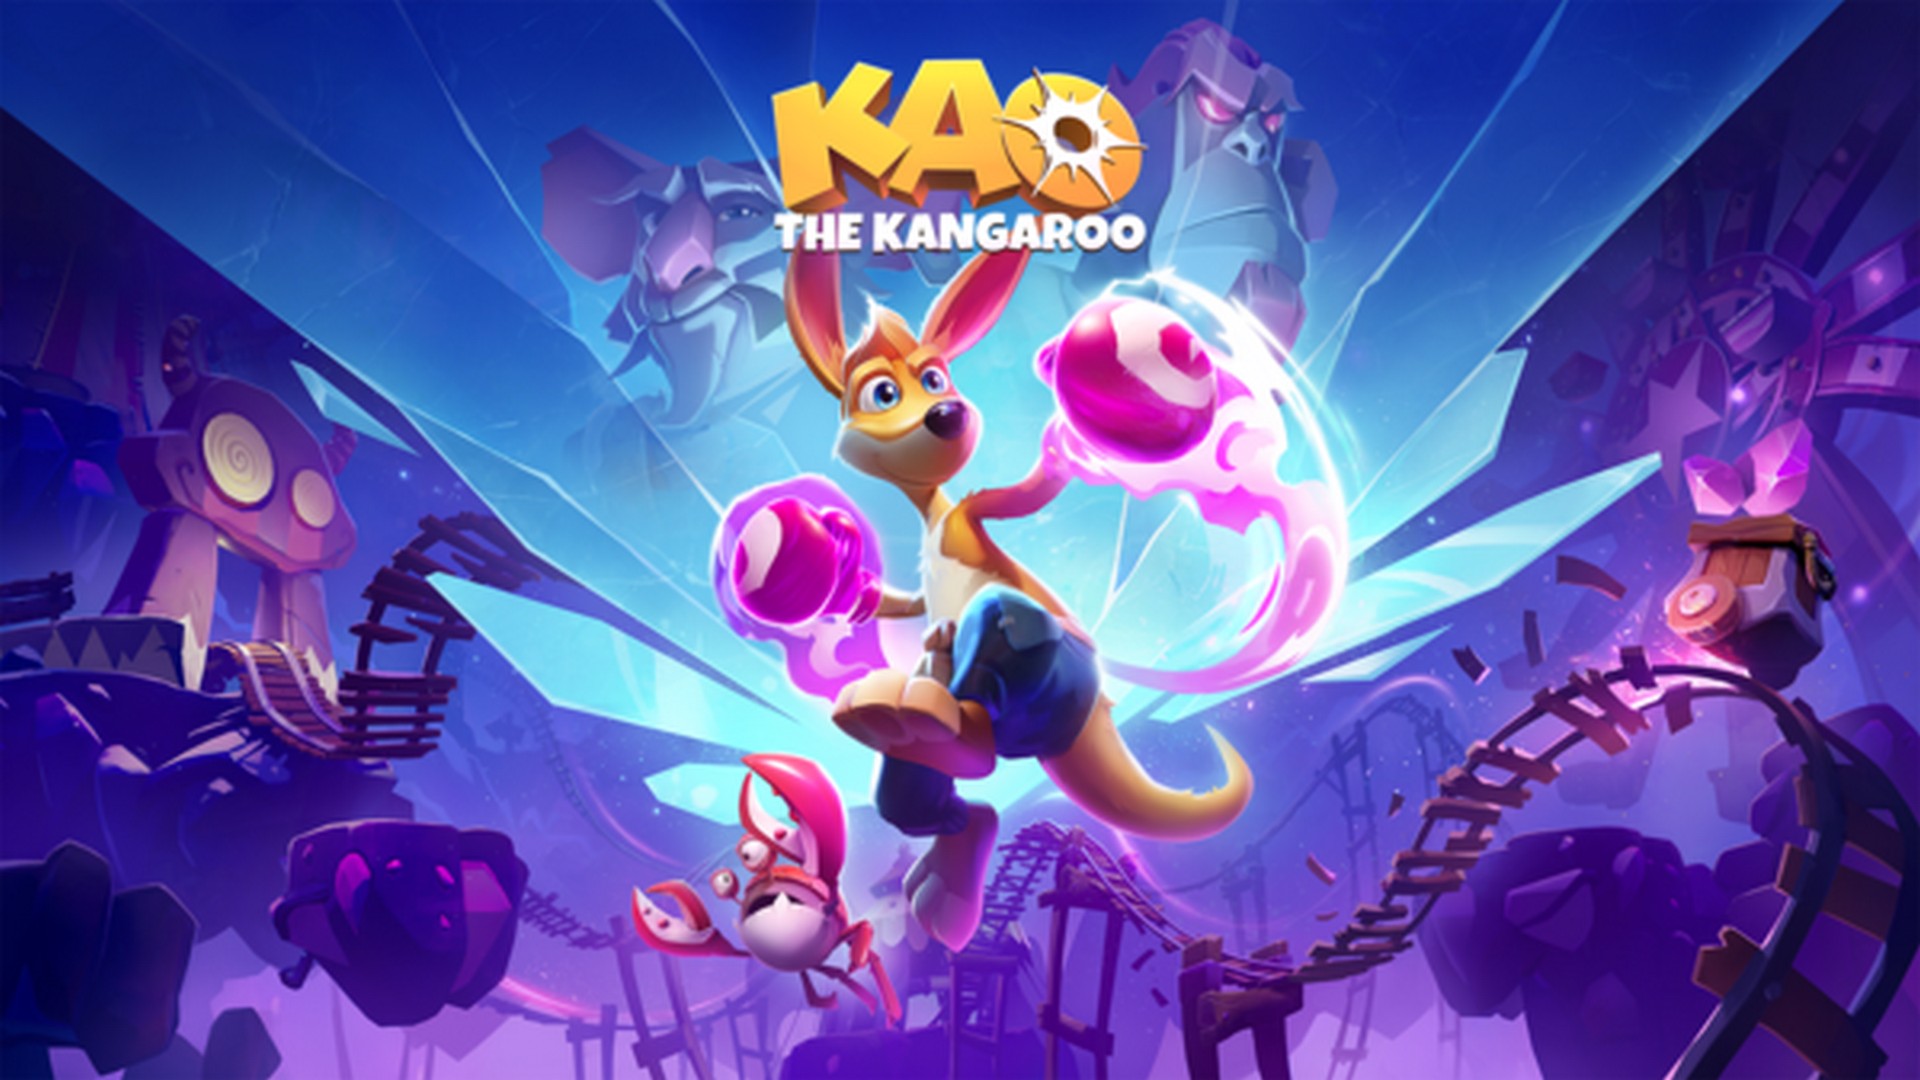 Brand New ‘Kao the Kangaroo’ Trailer Showcases Friends & Family Ahead of Launch On May 27